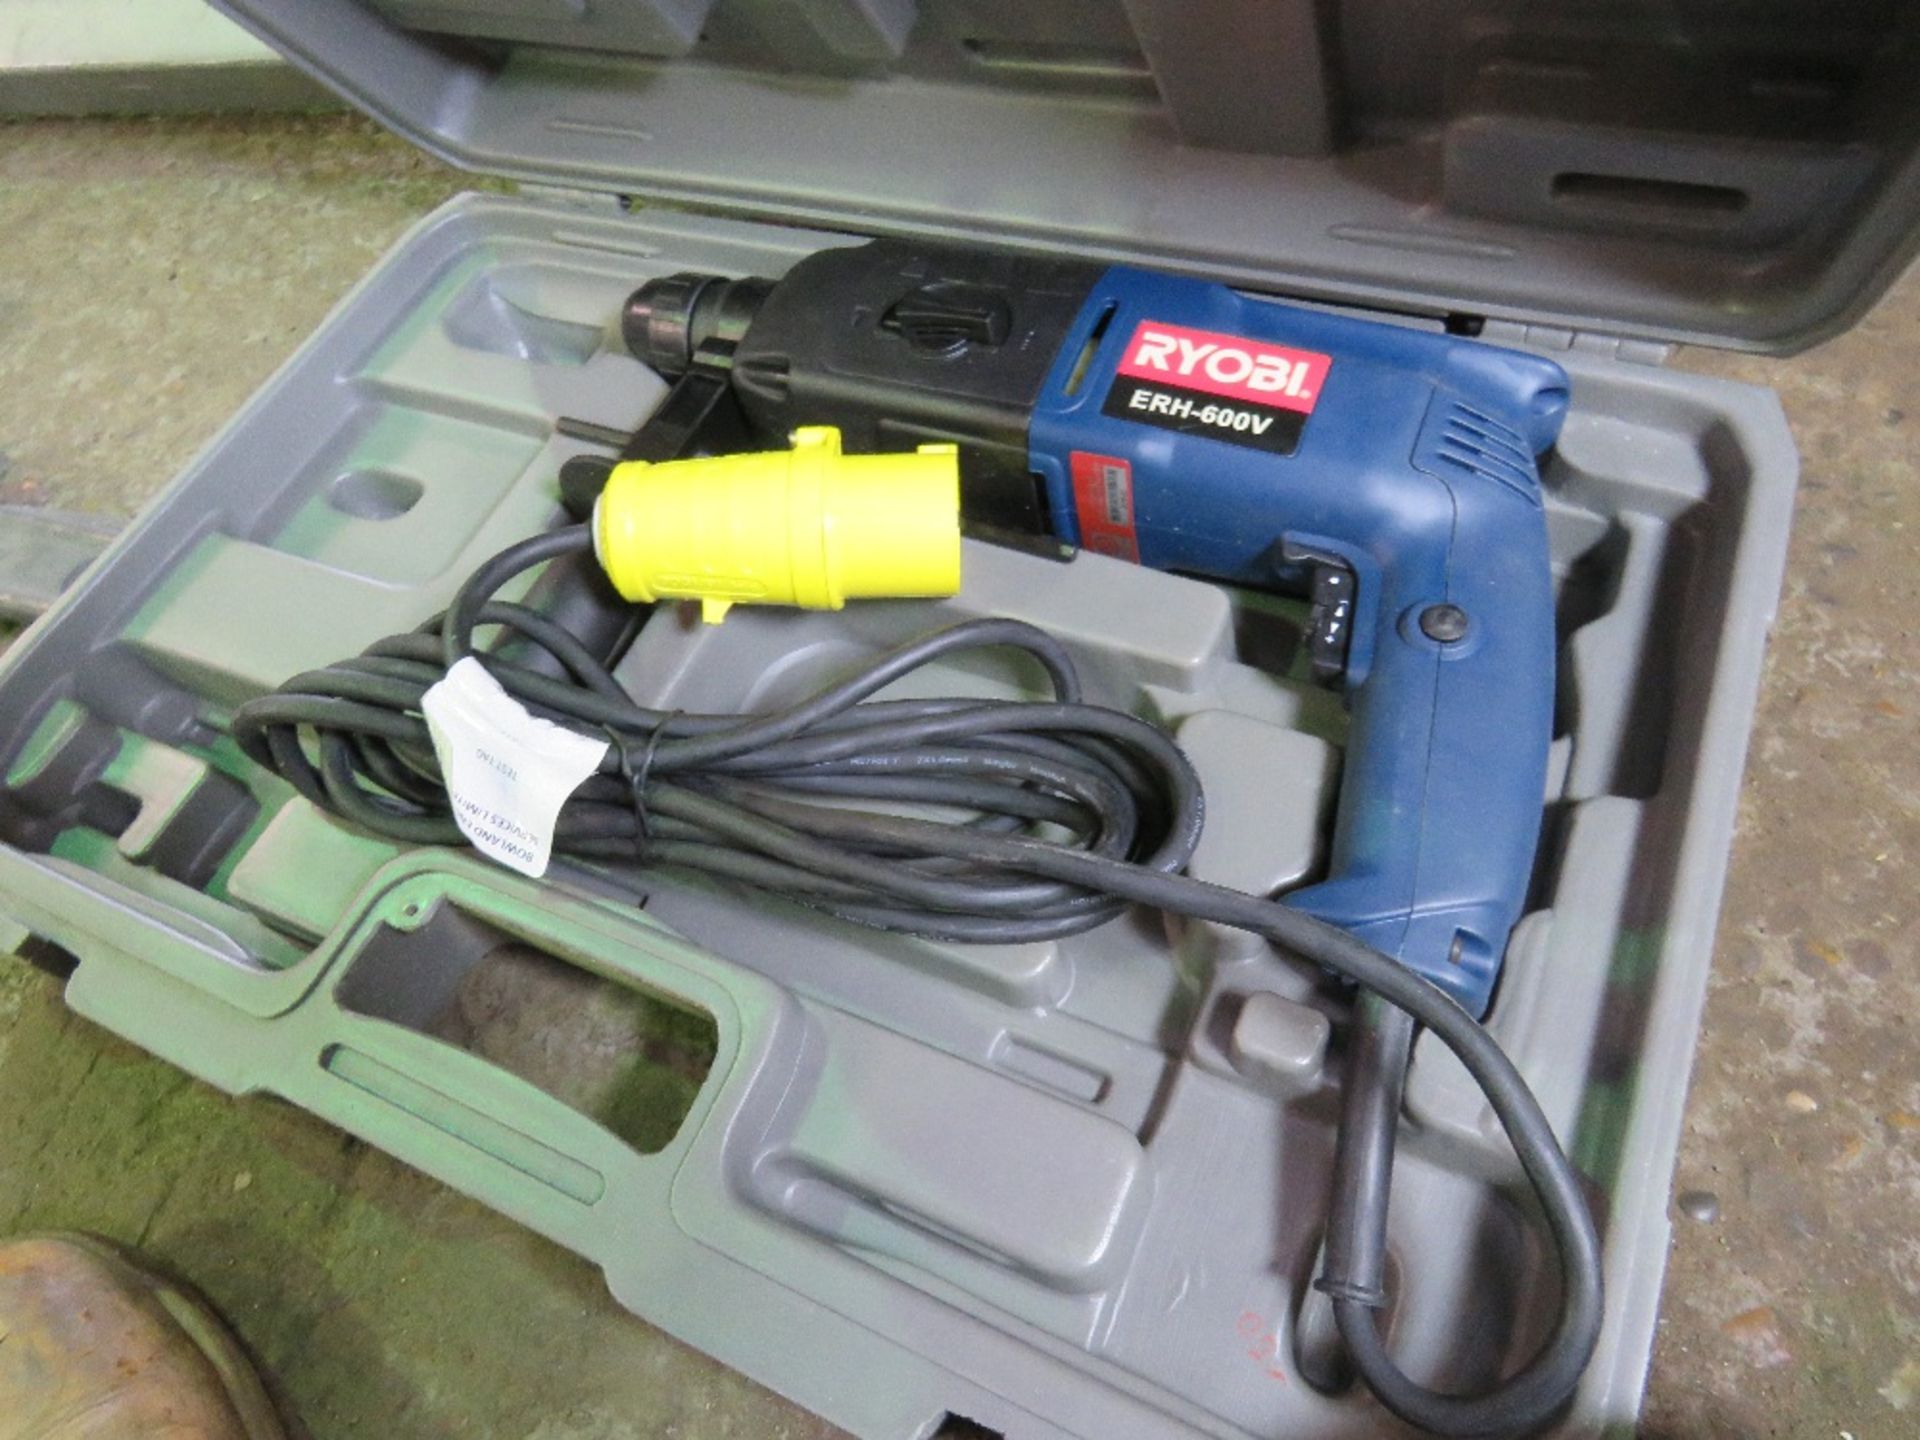 3 X RYOBI SDS 110 VOLT DRILLS. SOURCED FROM DEPOT CLEARANCE DUE TO A CHANGE IN COMPANY POLICY. - Image 4 of 4